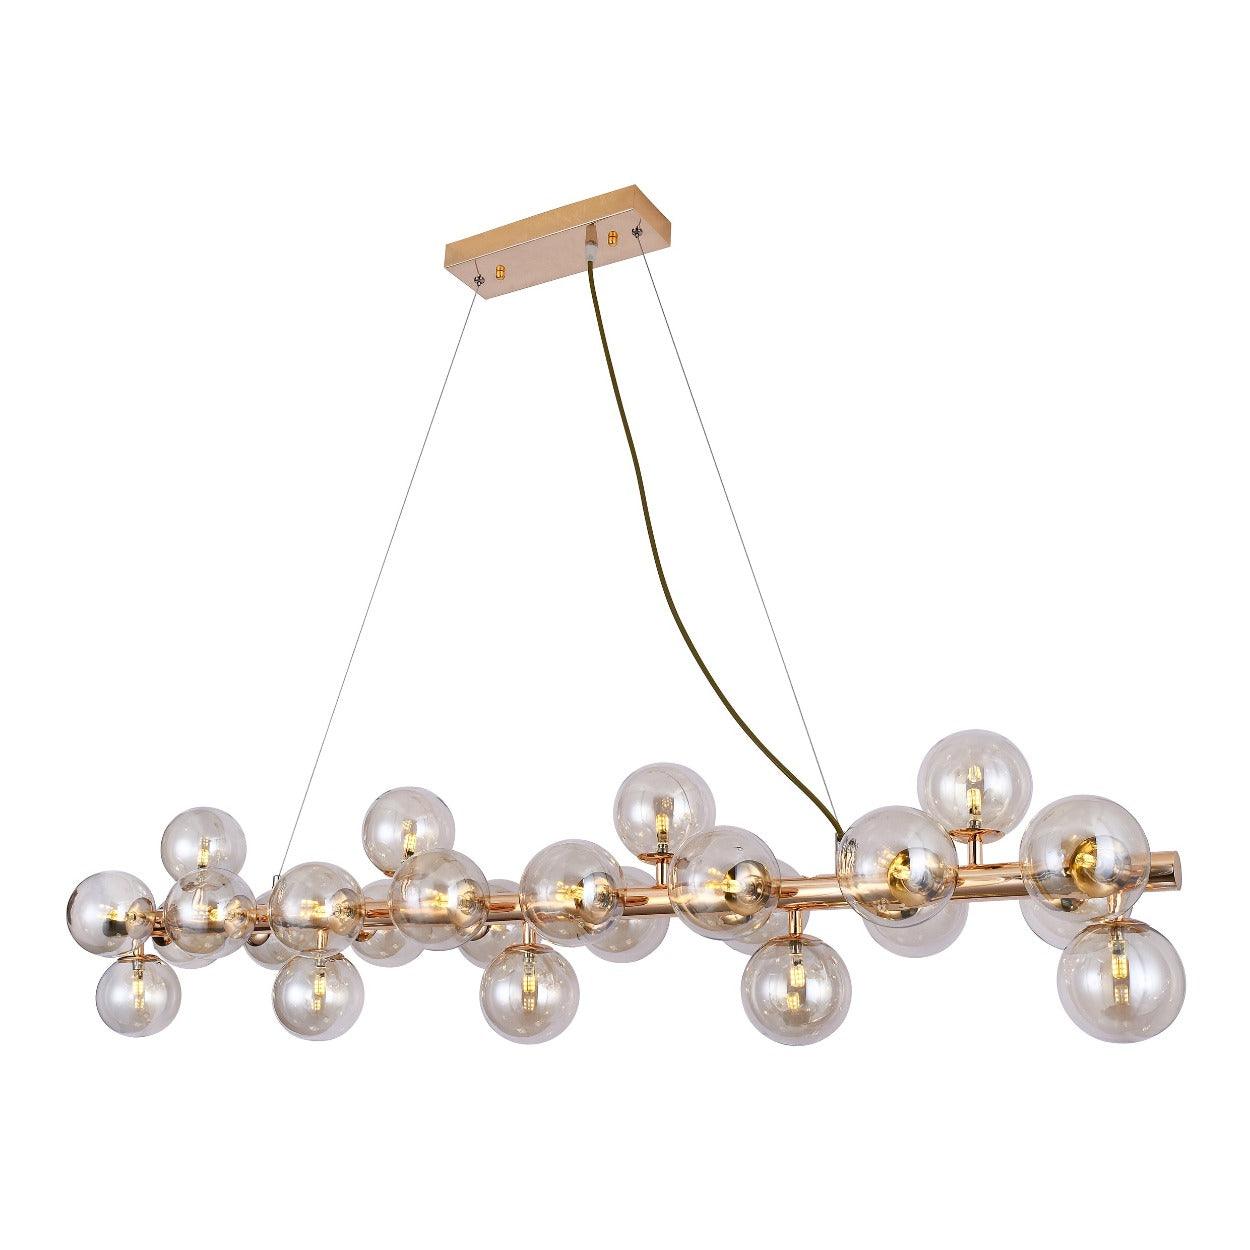 ANKUR ROMA 25 LIGHT CHAMPAGNE GLASS WITH GOLD METAL RADIANT CHANDELIER - Ankur Lighting